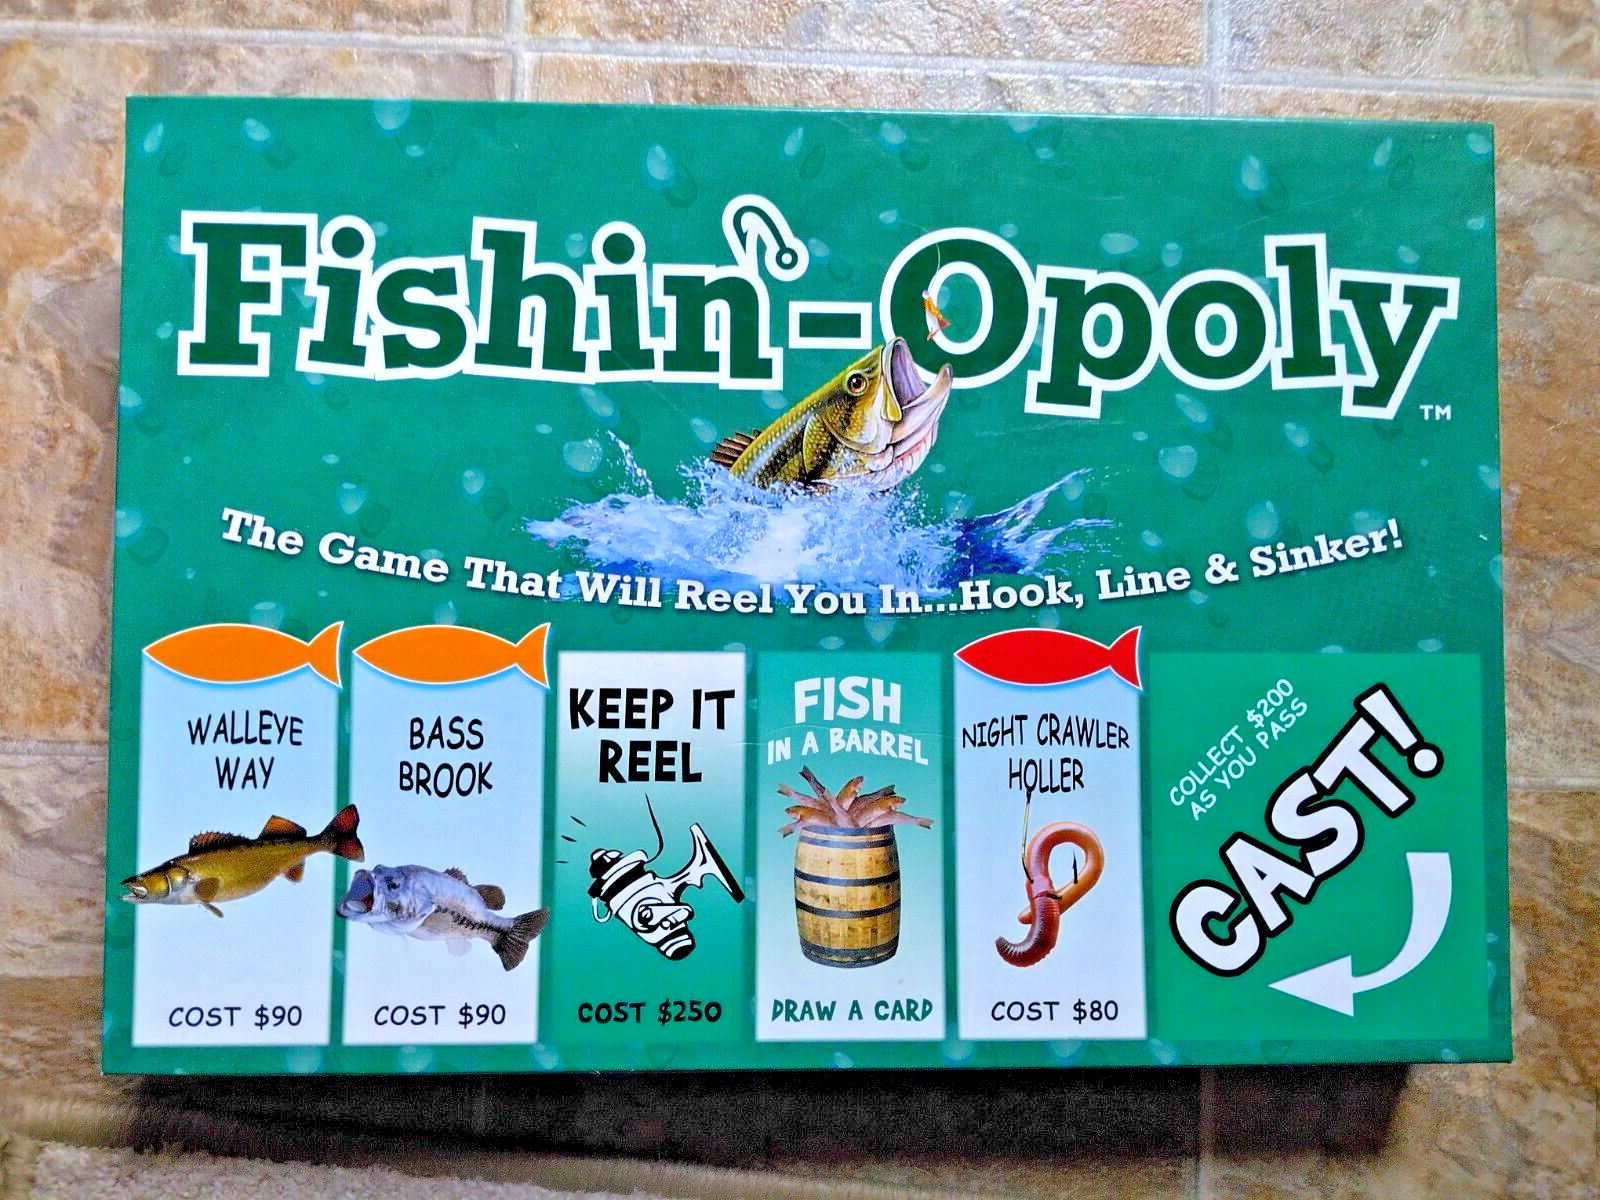 Fish-Opoly Monopoly Game - Complete! Buy, sell, trade your favorite fish/more! - $19.19